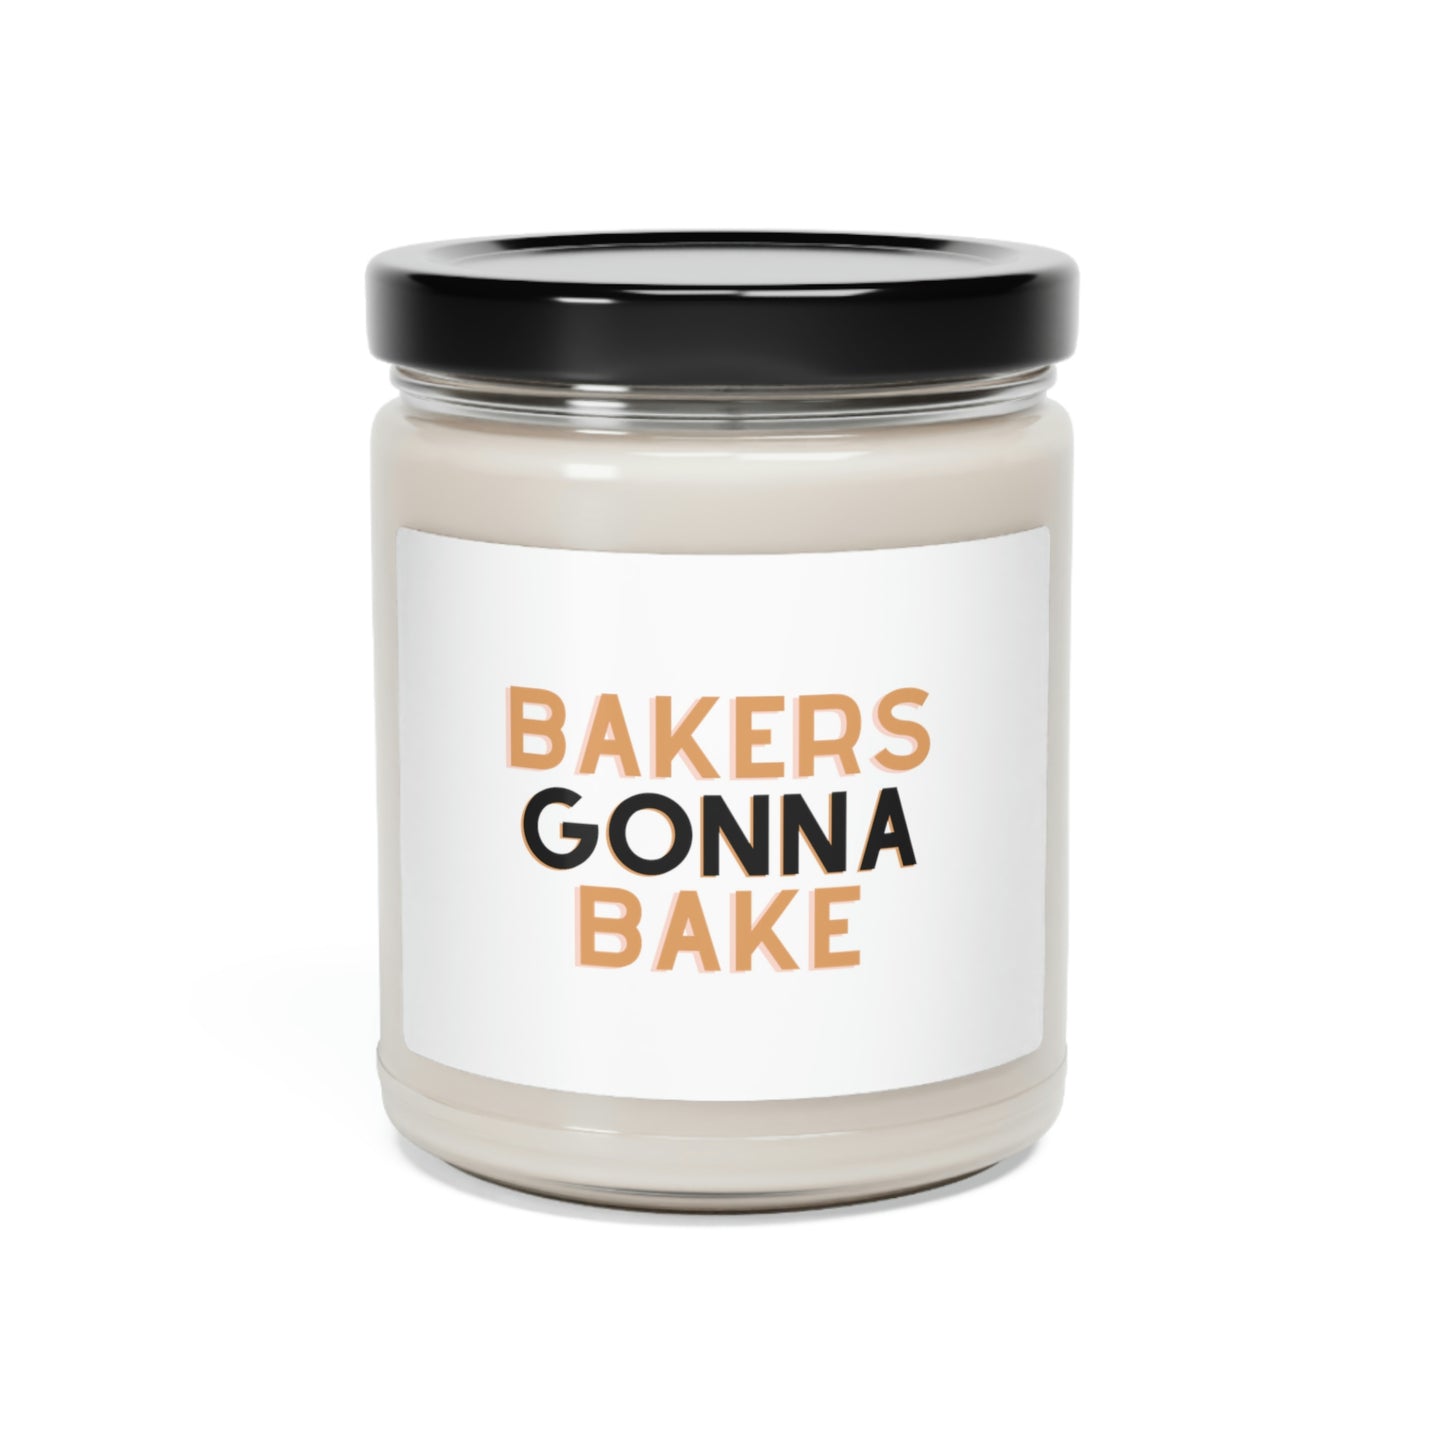 “Bakers Gonna Bake” Scented Soy Candle, 9oz - Weave Got Gifts - Unique Gifts You Won’t Find Anywhere Else!